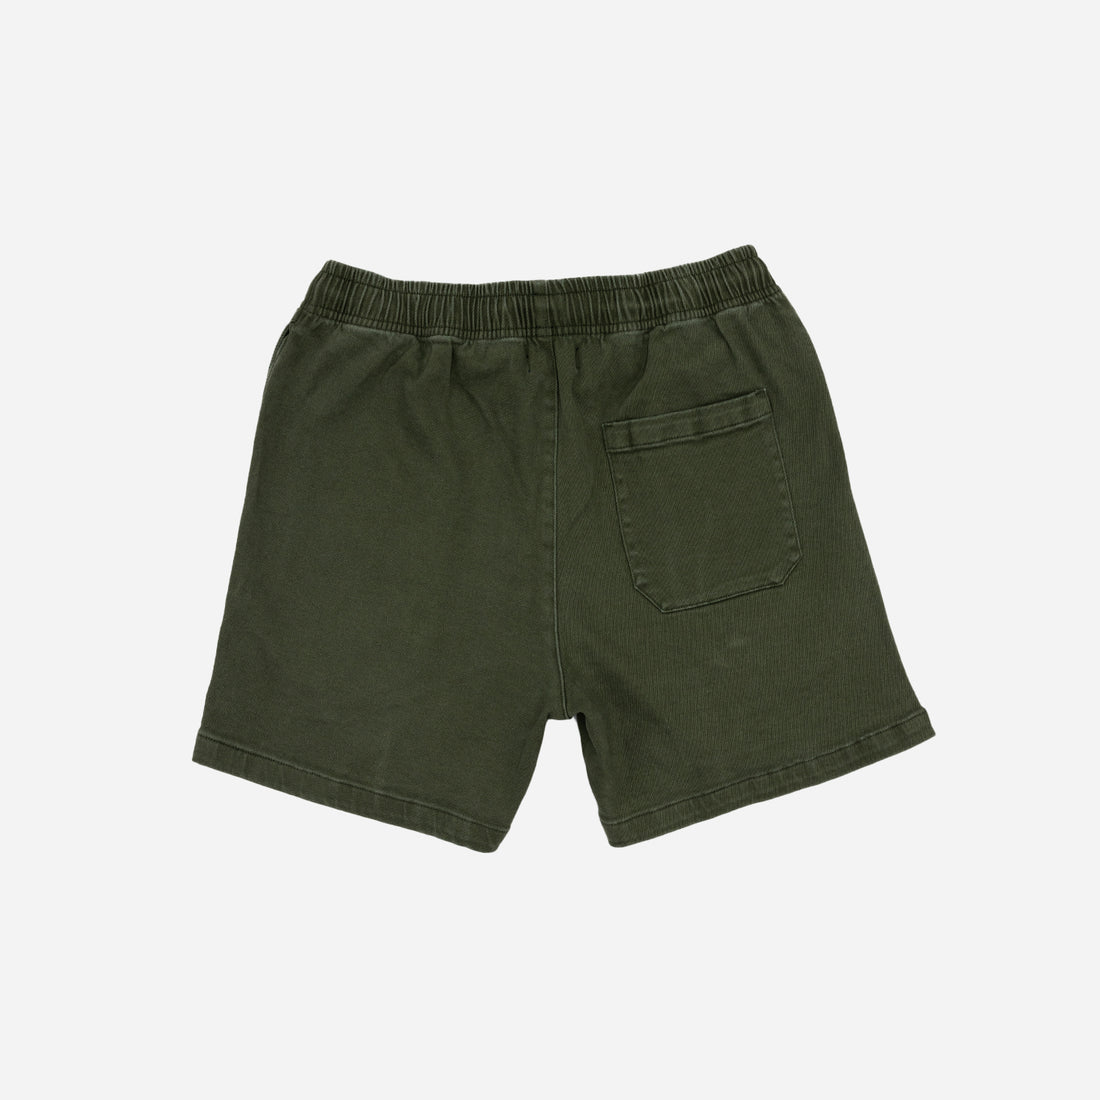 Strive For Greatness High Waist Shorts In Olive • Impressions